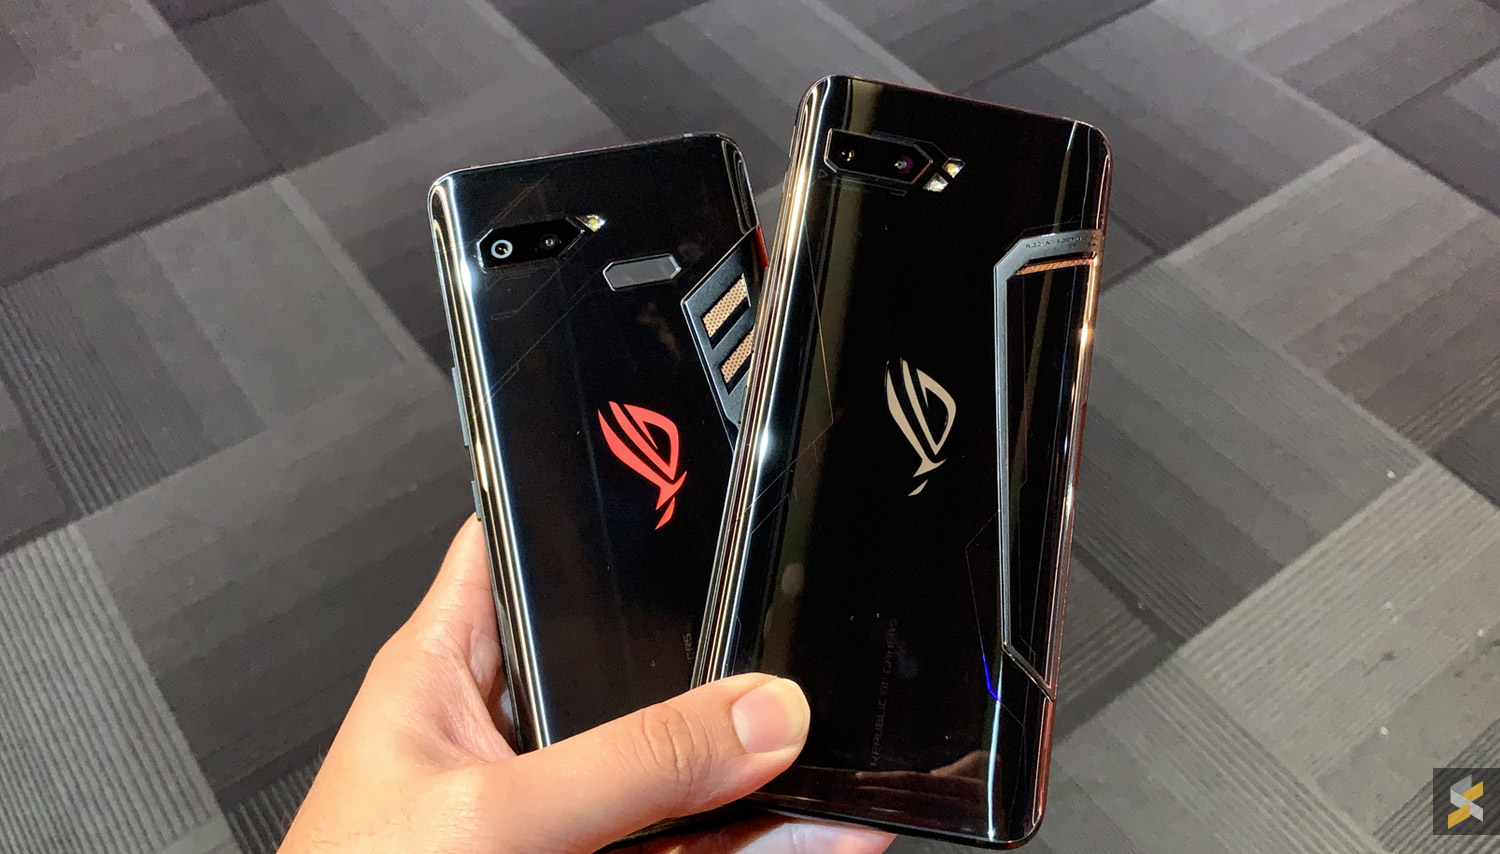 ROG Phone II with 12GB RAM and 512GB storage will be priced under RM4